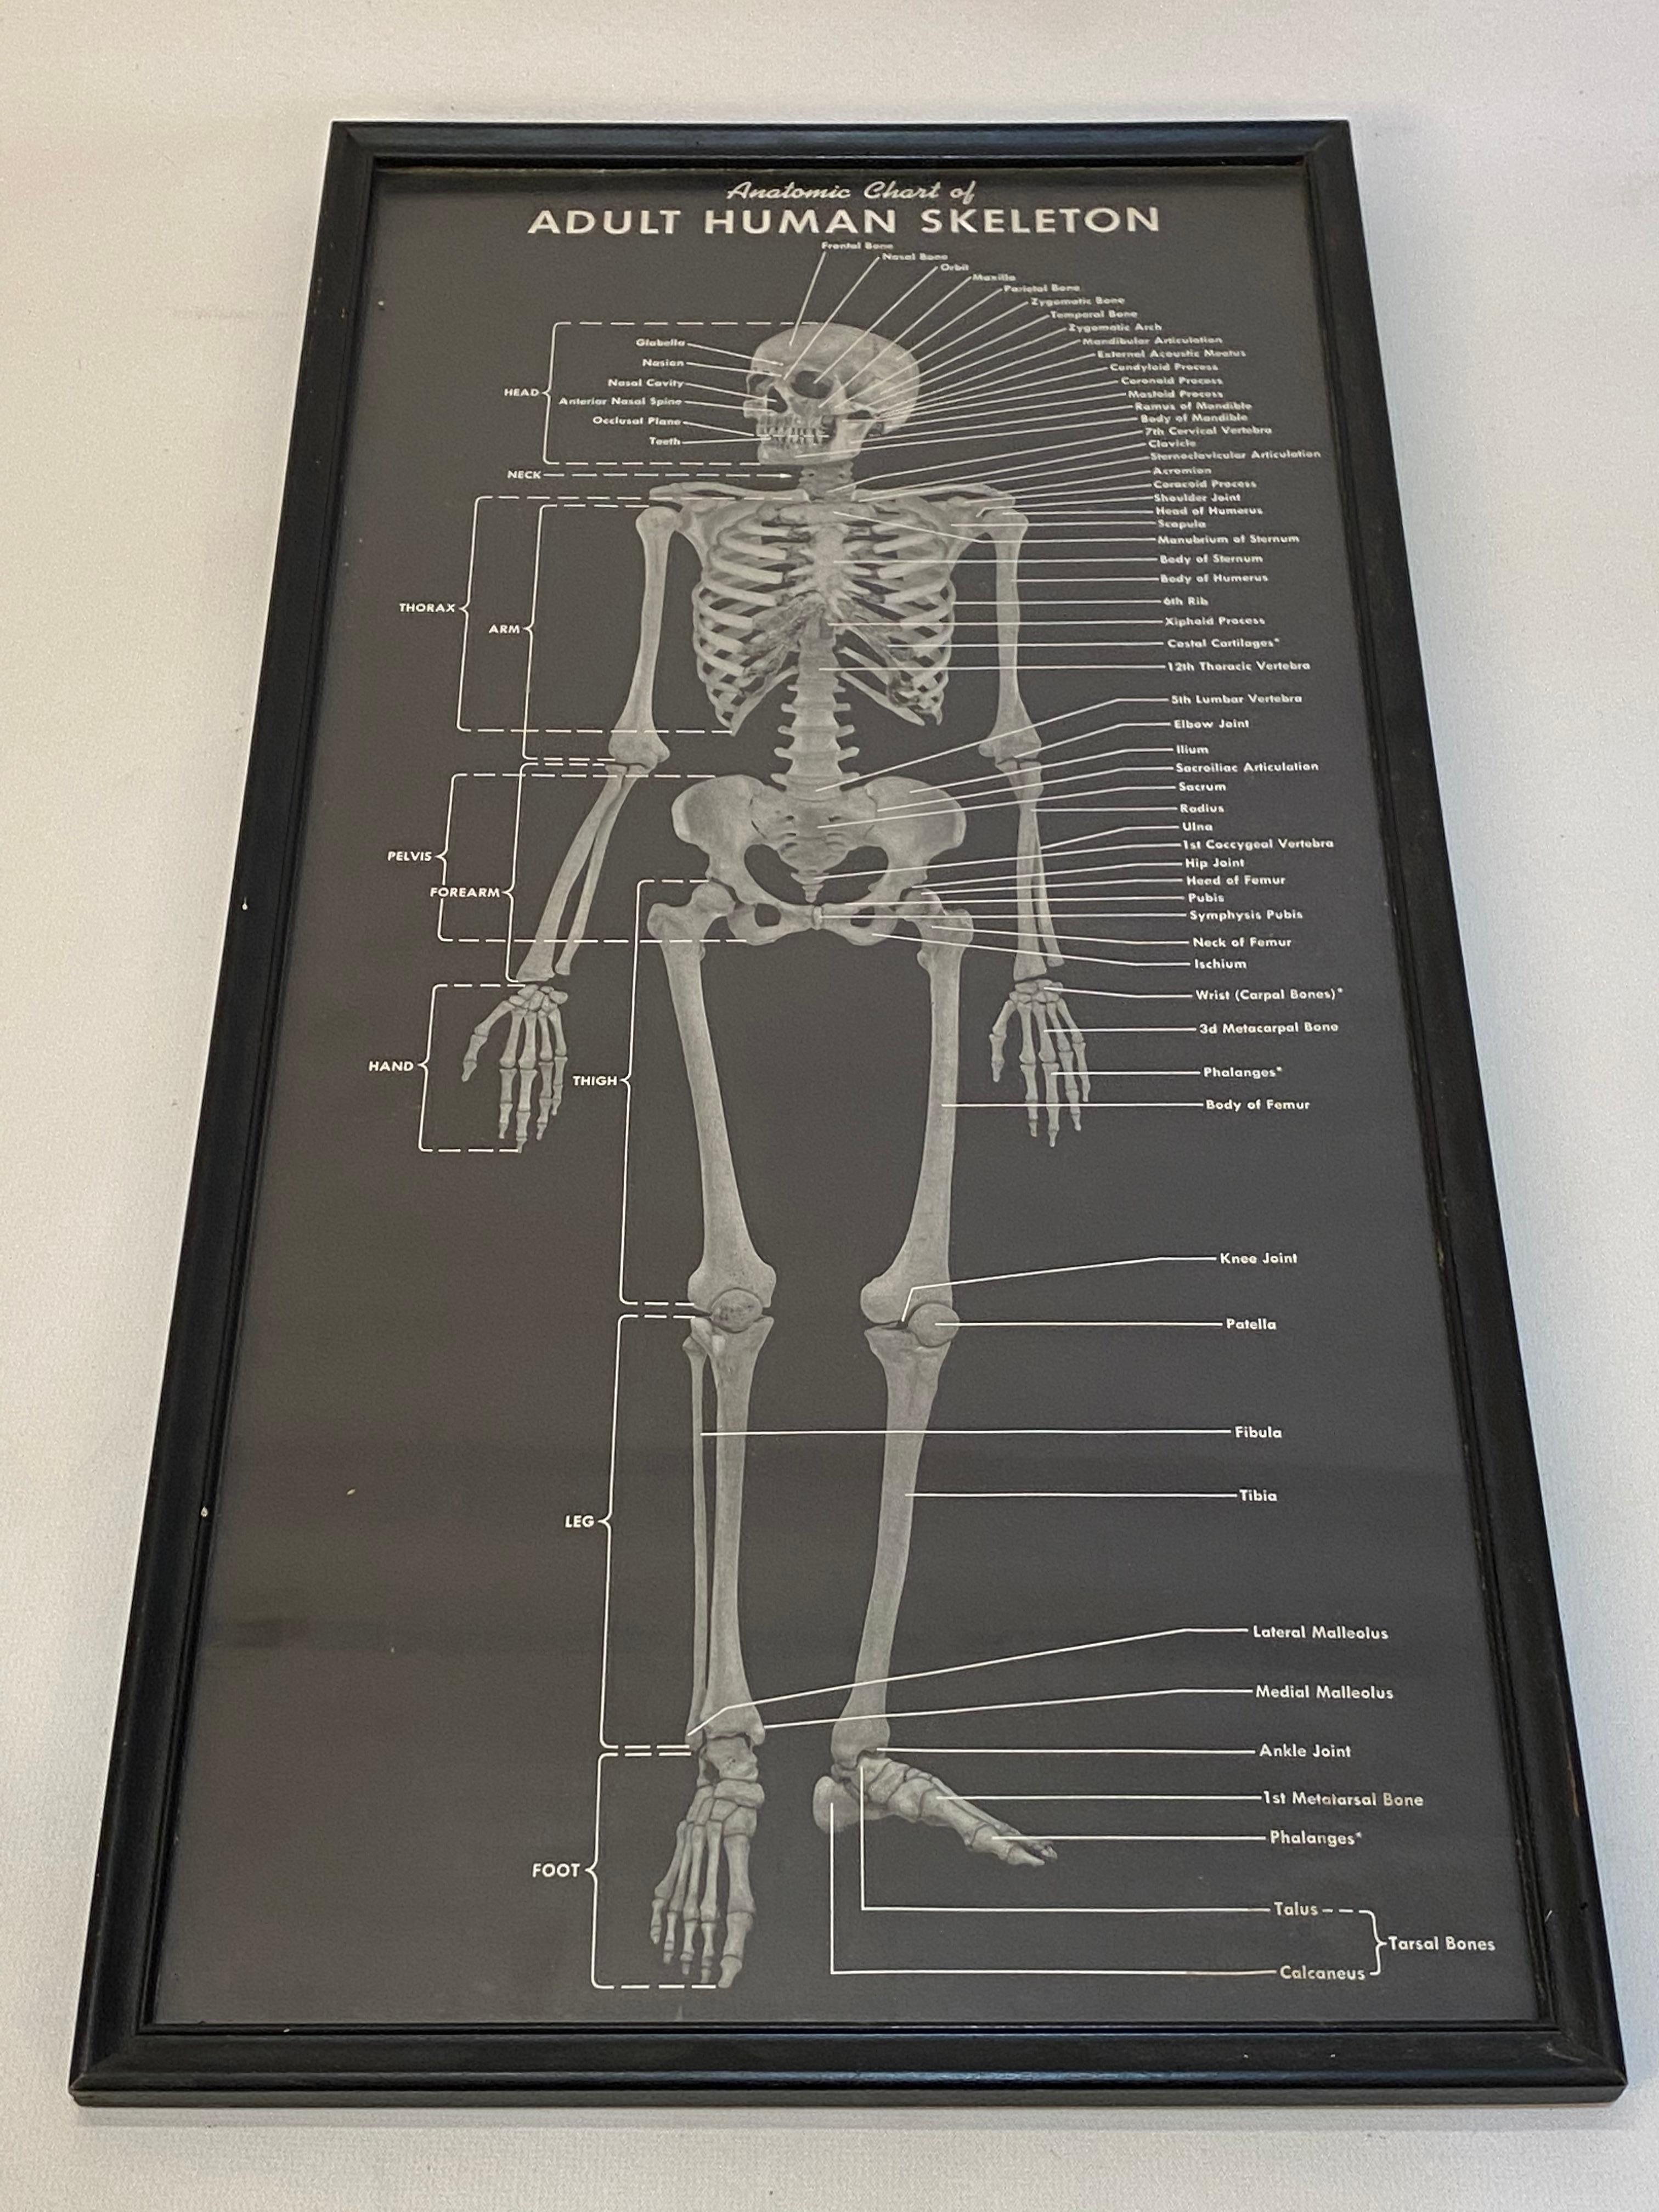 Biology teaching aid anatomic chart of Adult Human Skeletal System, circa late 1940s. Framed and under glass poster of the human skeletal system. Very good condition with no visible damage, foxing, tears or restorations. Inscribed on the back. The